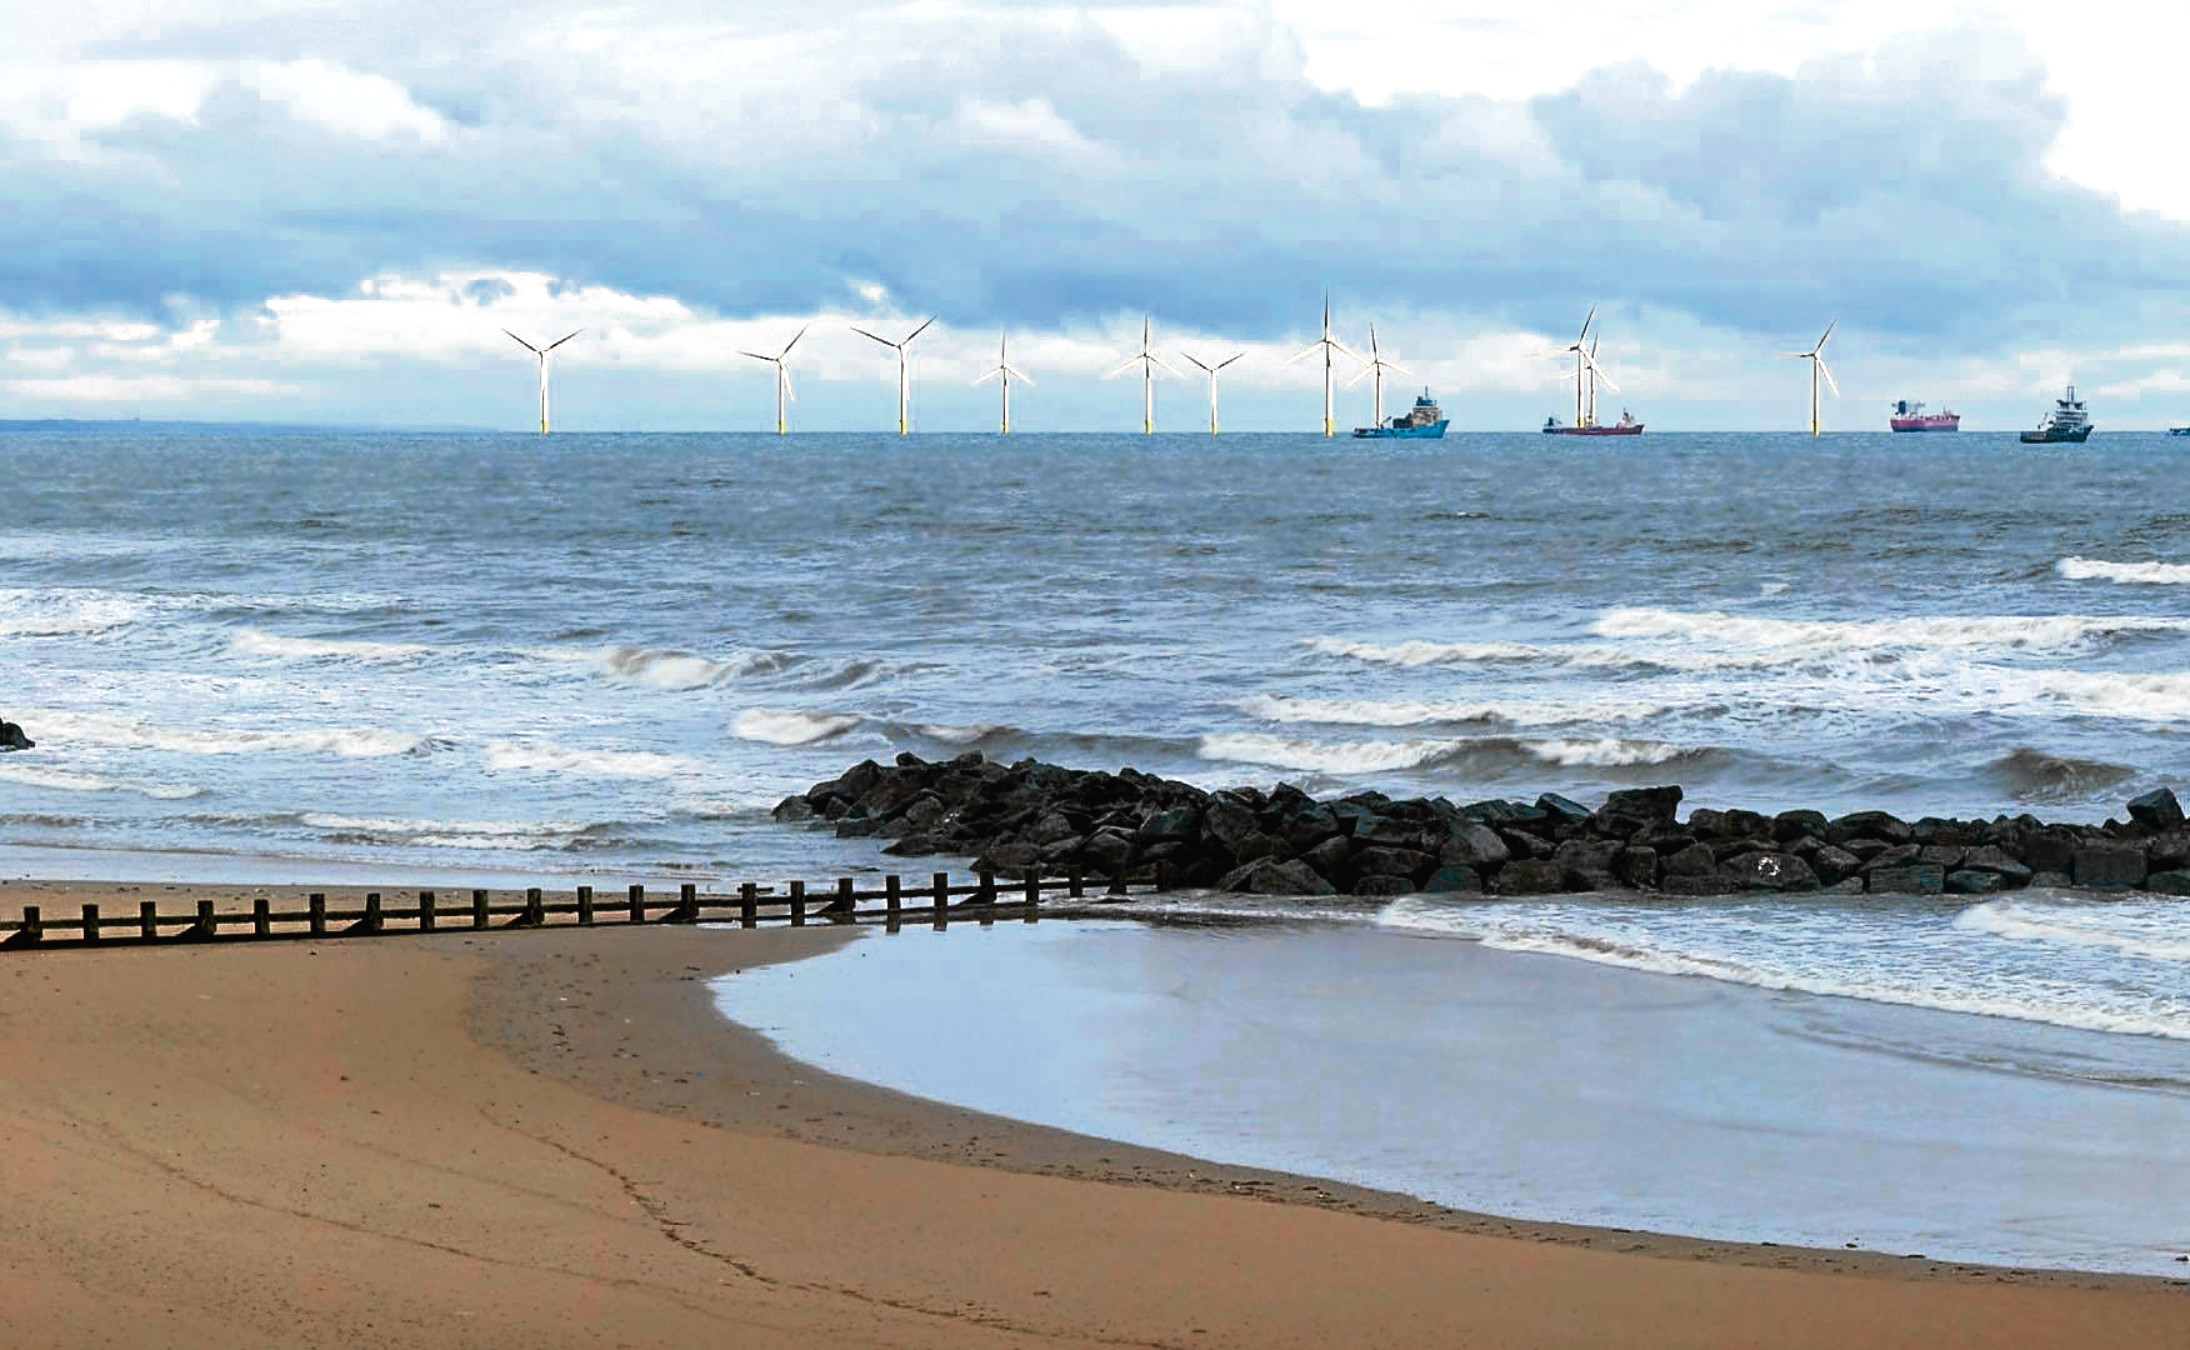 Artist's impression of the scale of the wind farm